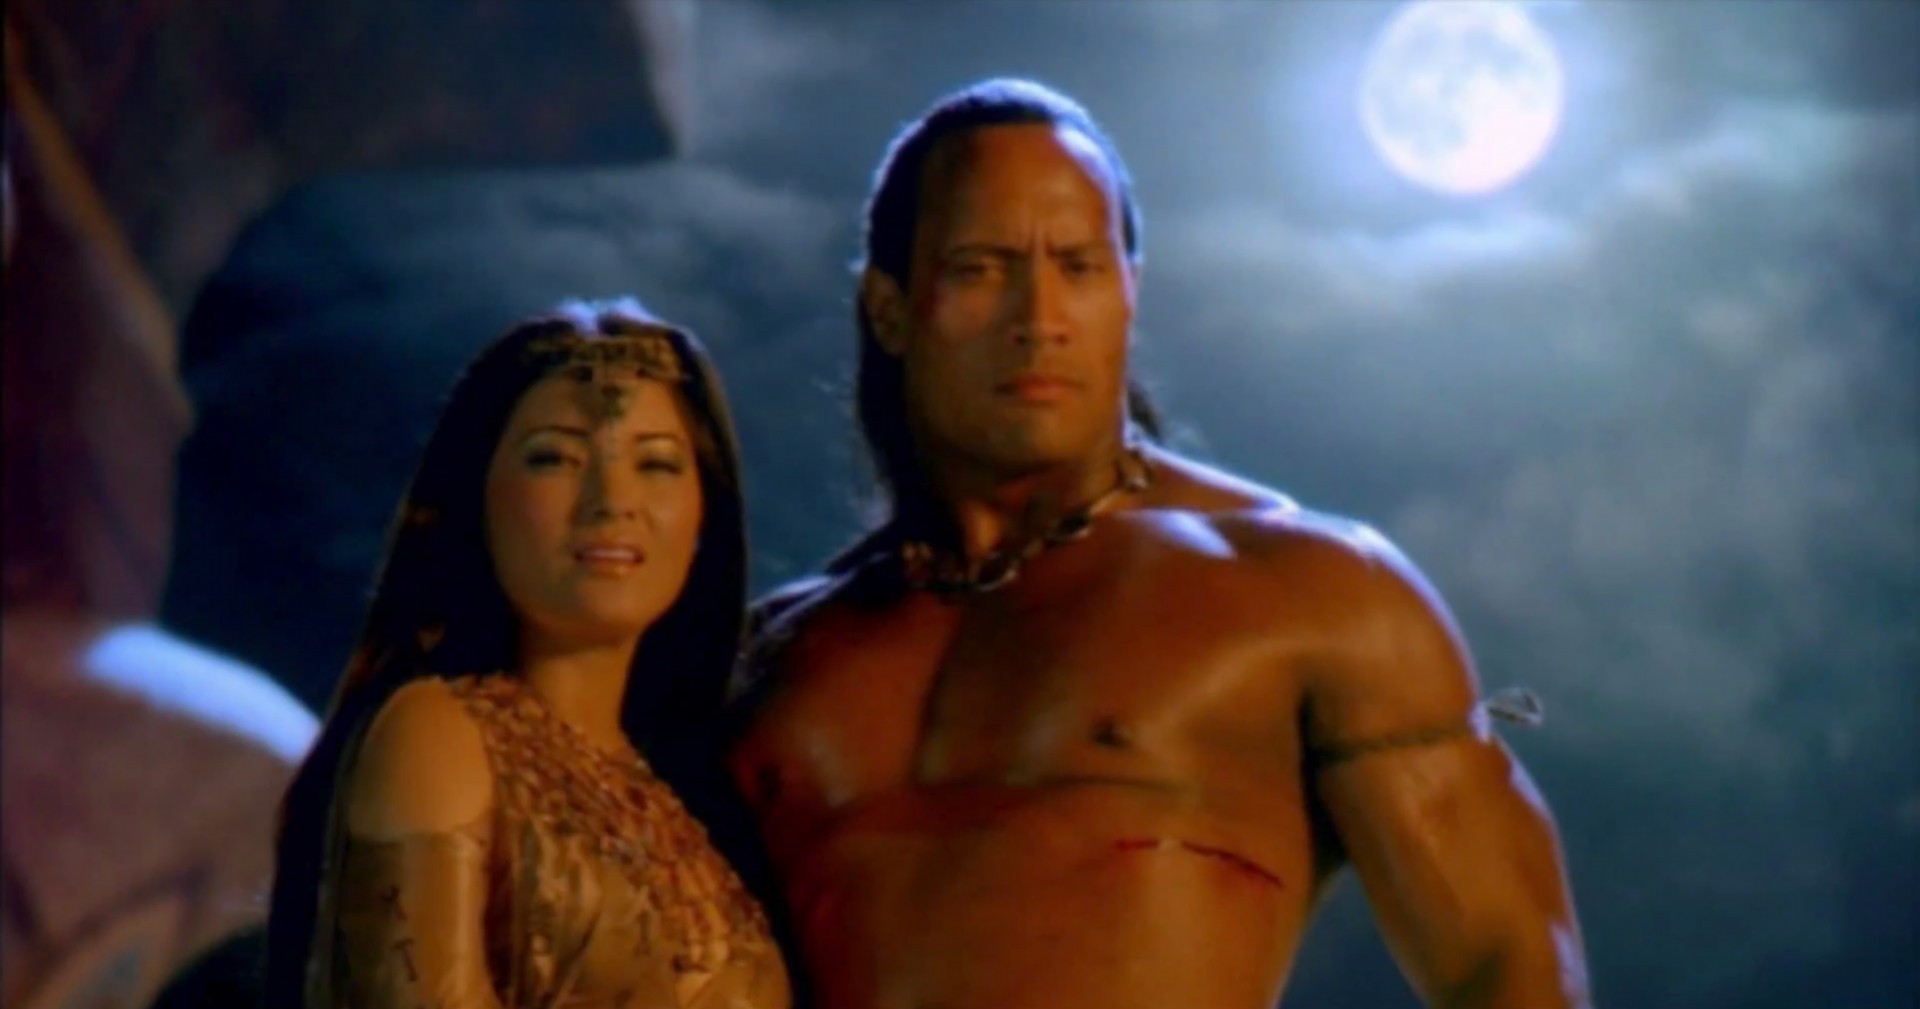 The Scorpion King High Defination HD Wallpapers - All HD Backgrounds